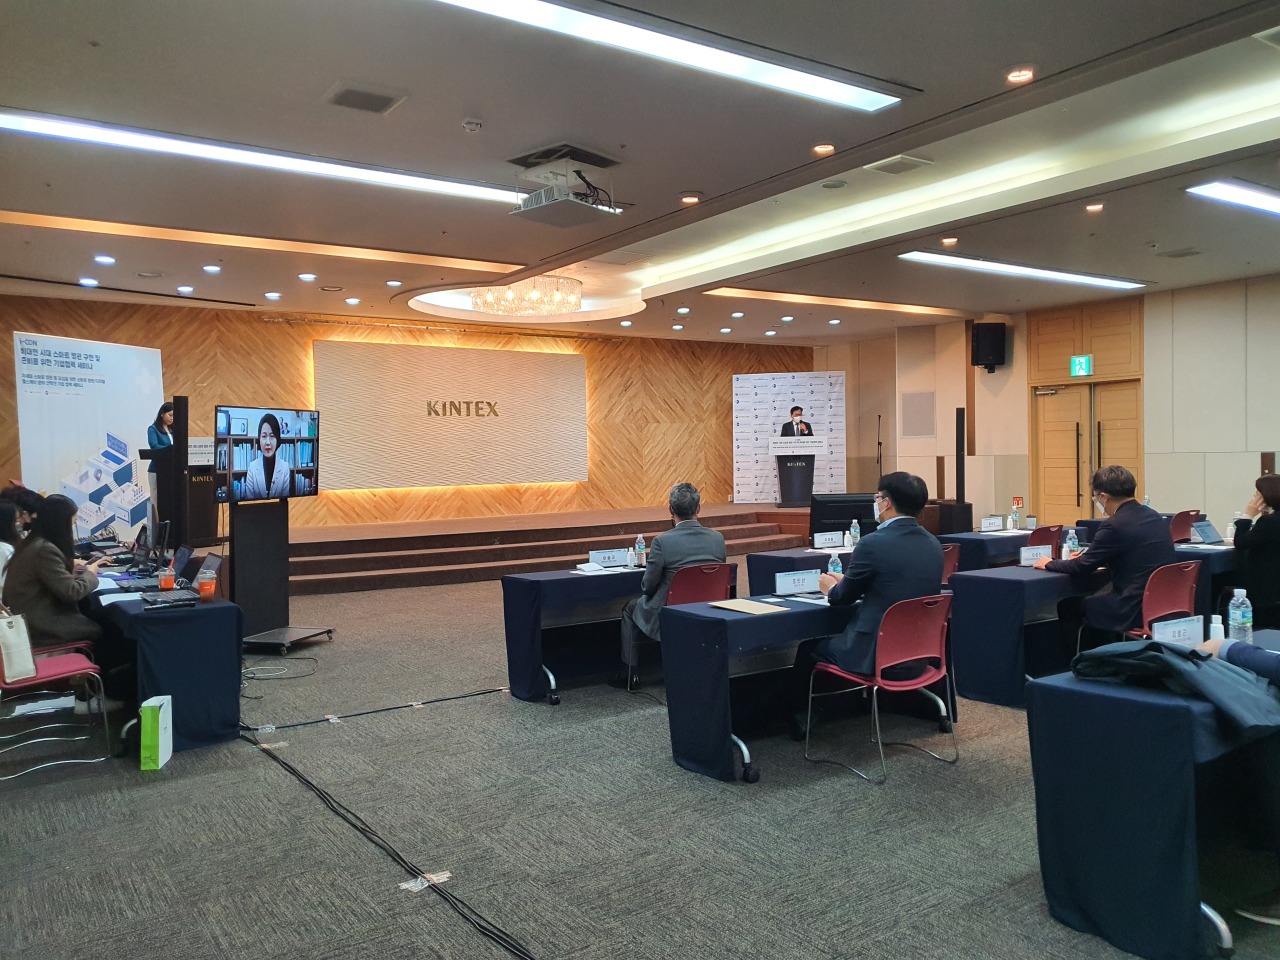 Korea Bio holds a seminar on introducing next generation smart hospitals as part of the Ministry of SMEs and Startups’ i-CON project at Kintex in Gyeonggi Province on Nov. 19. (Korea Bio)